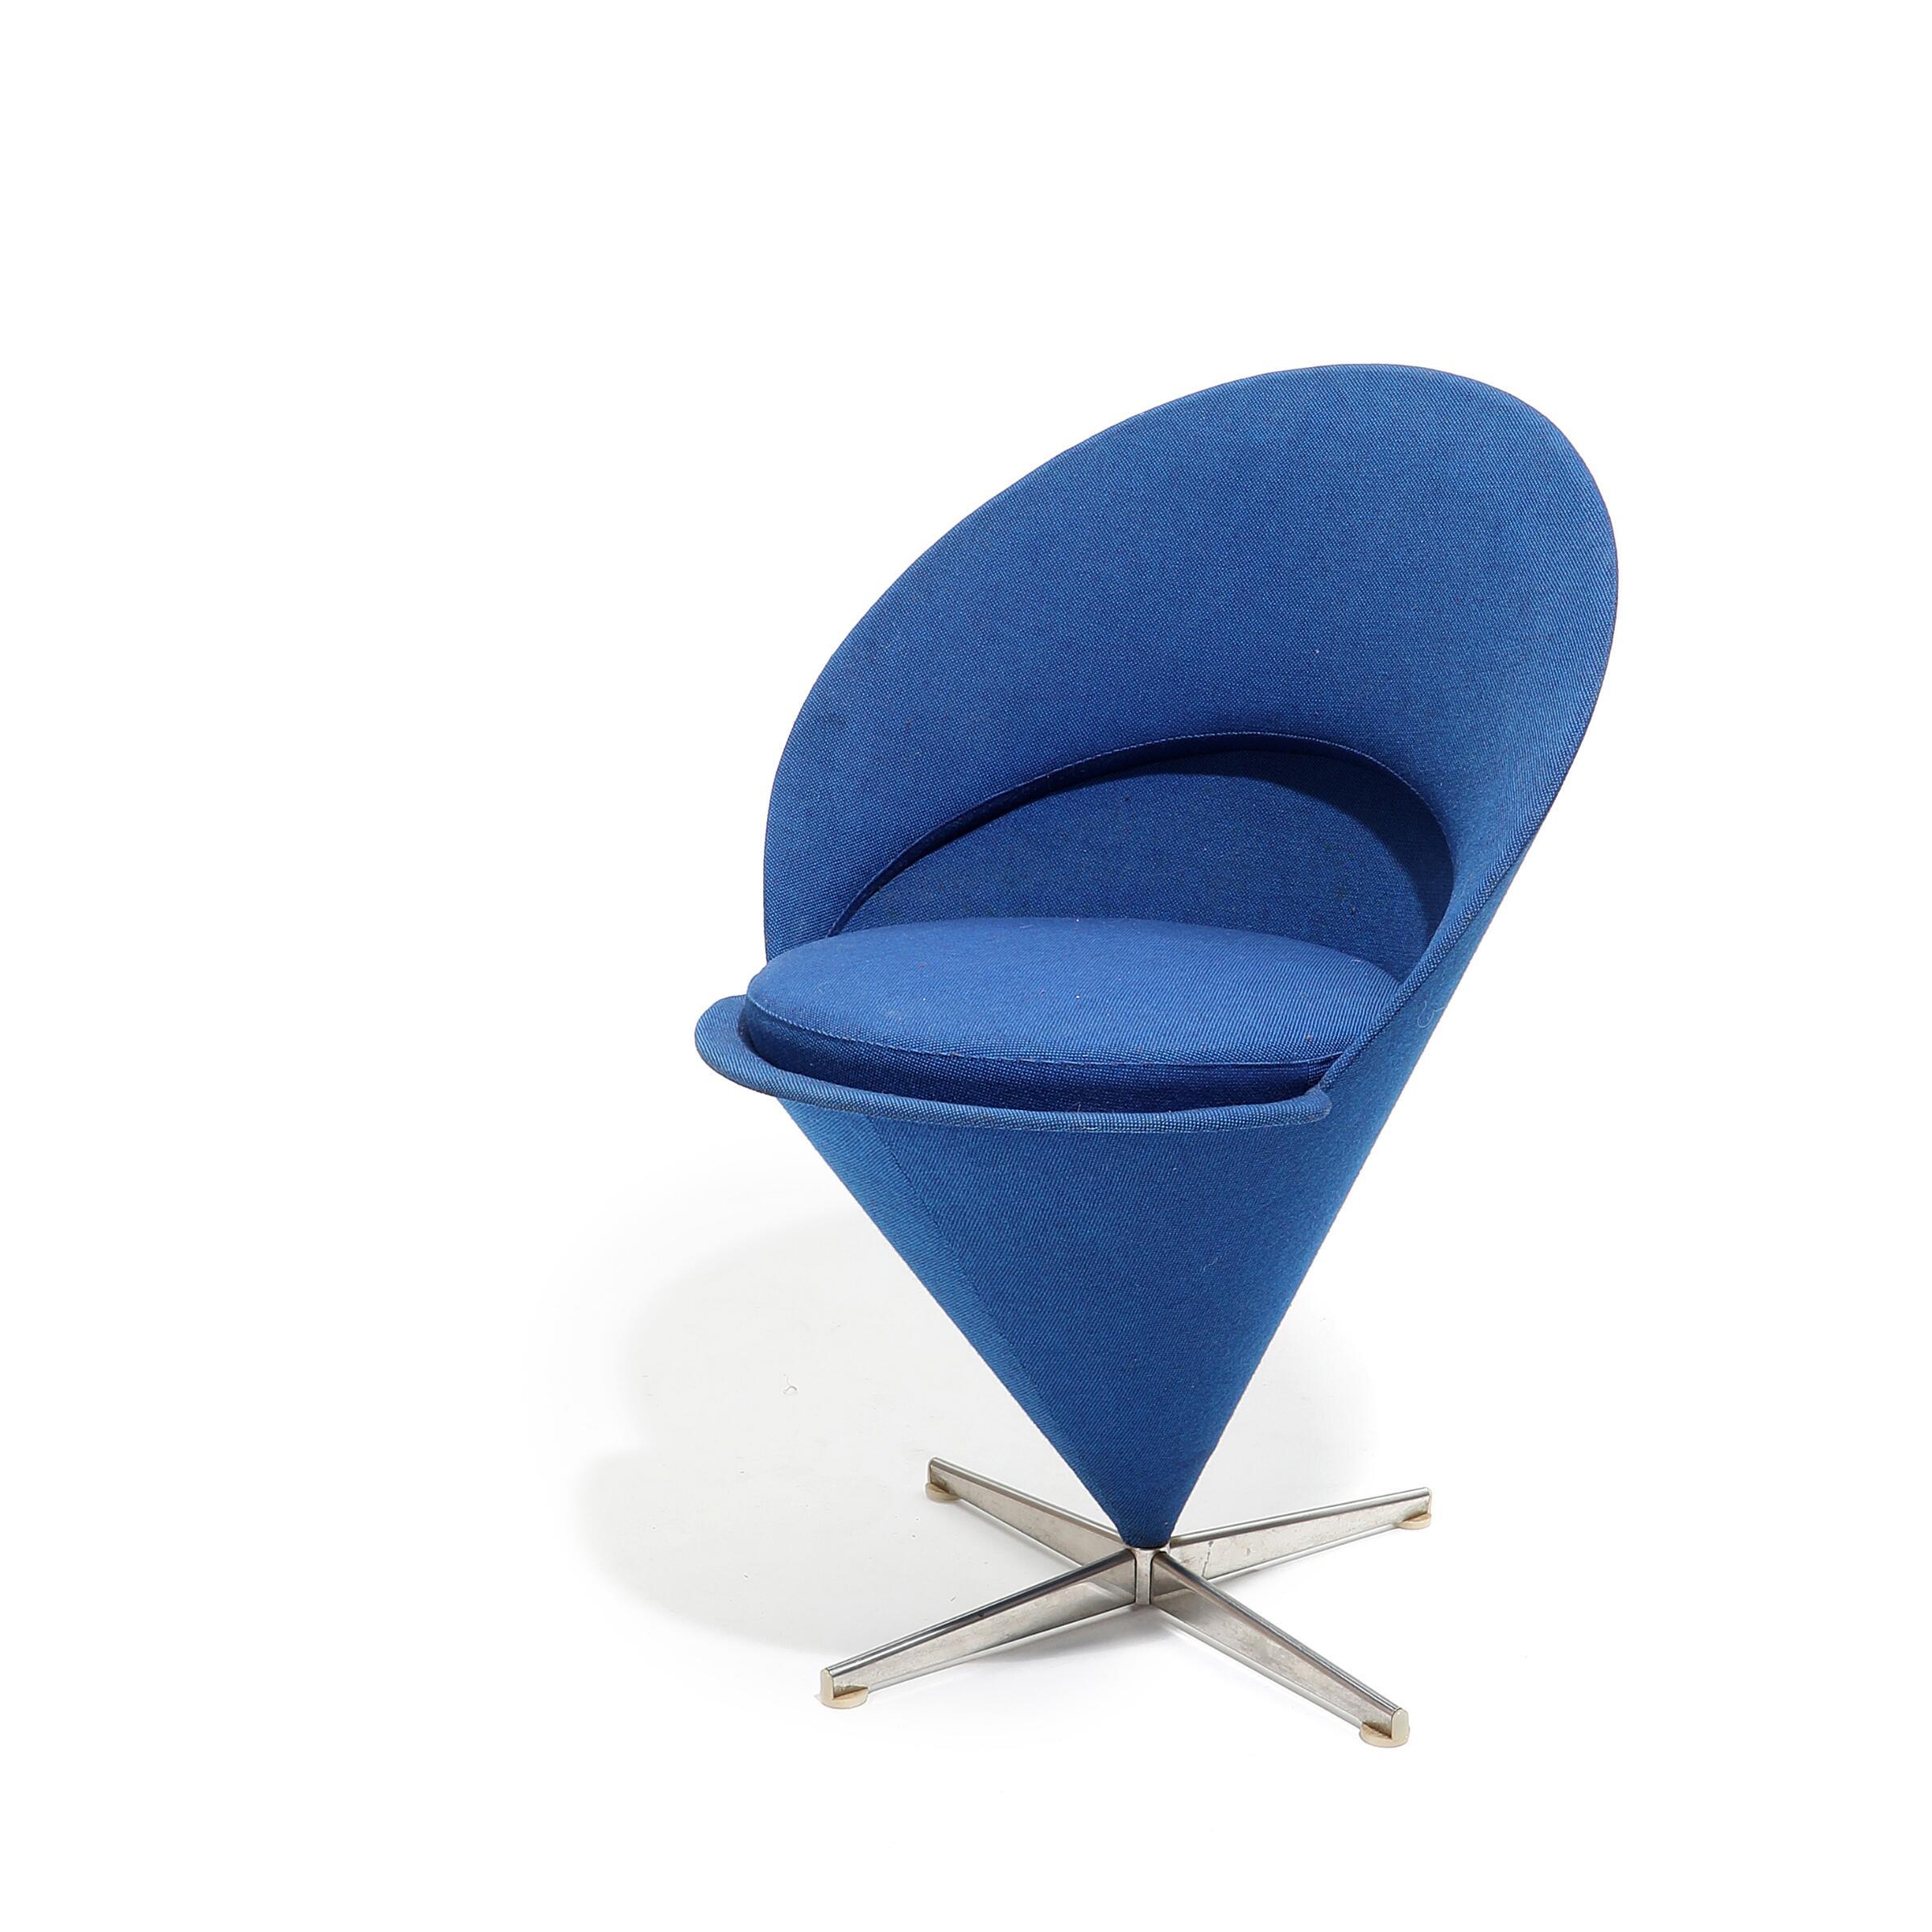 Mid-Century Modern Early Edition Verner Panton Blue Cone Chair Made by Plus Line, 1958 For Sale